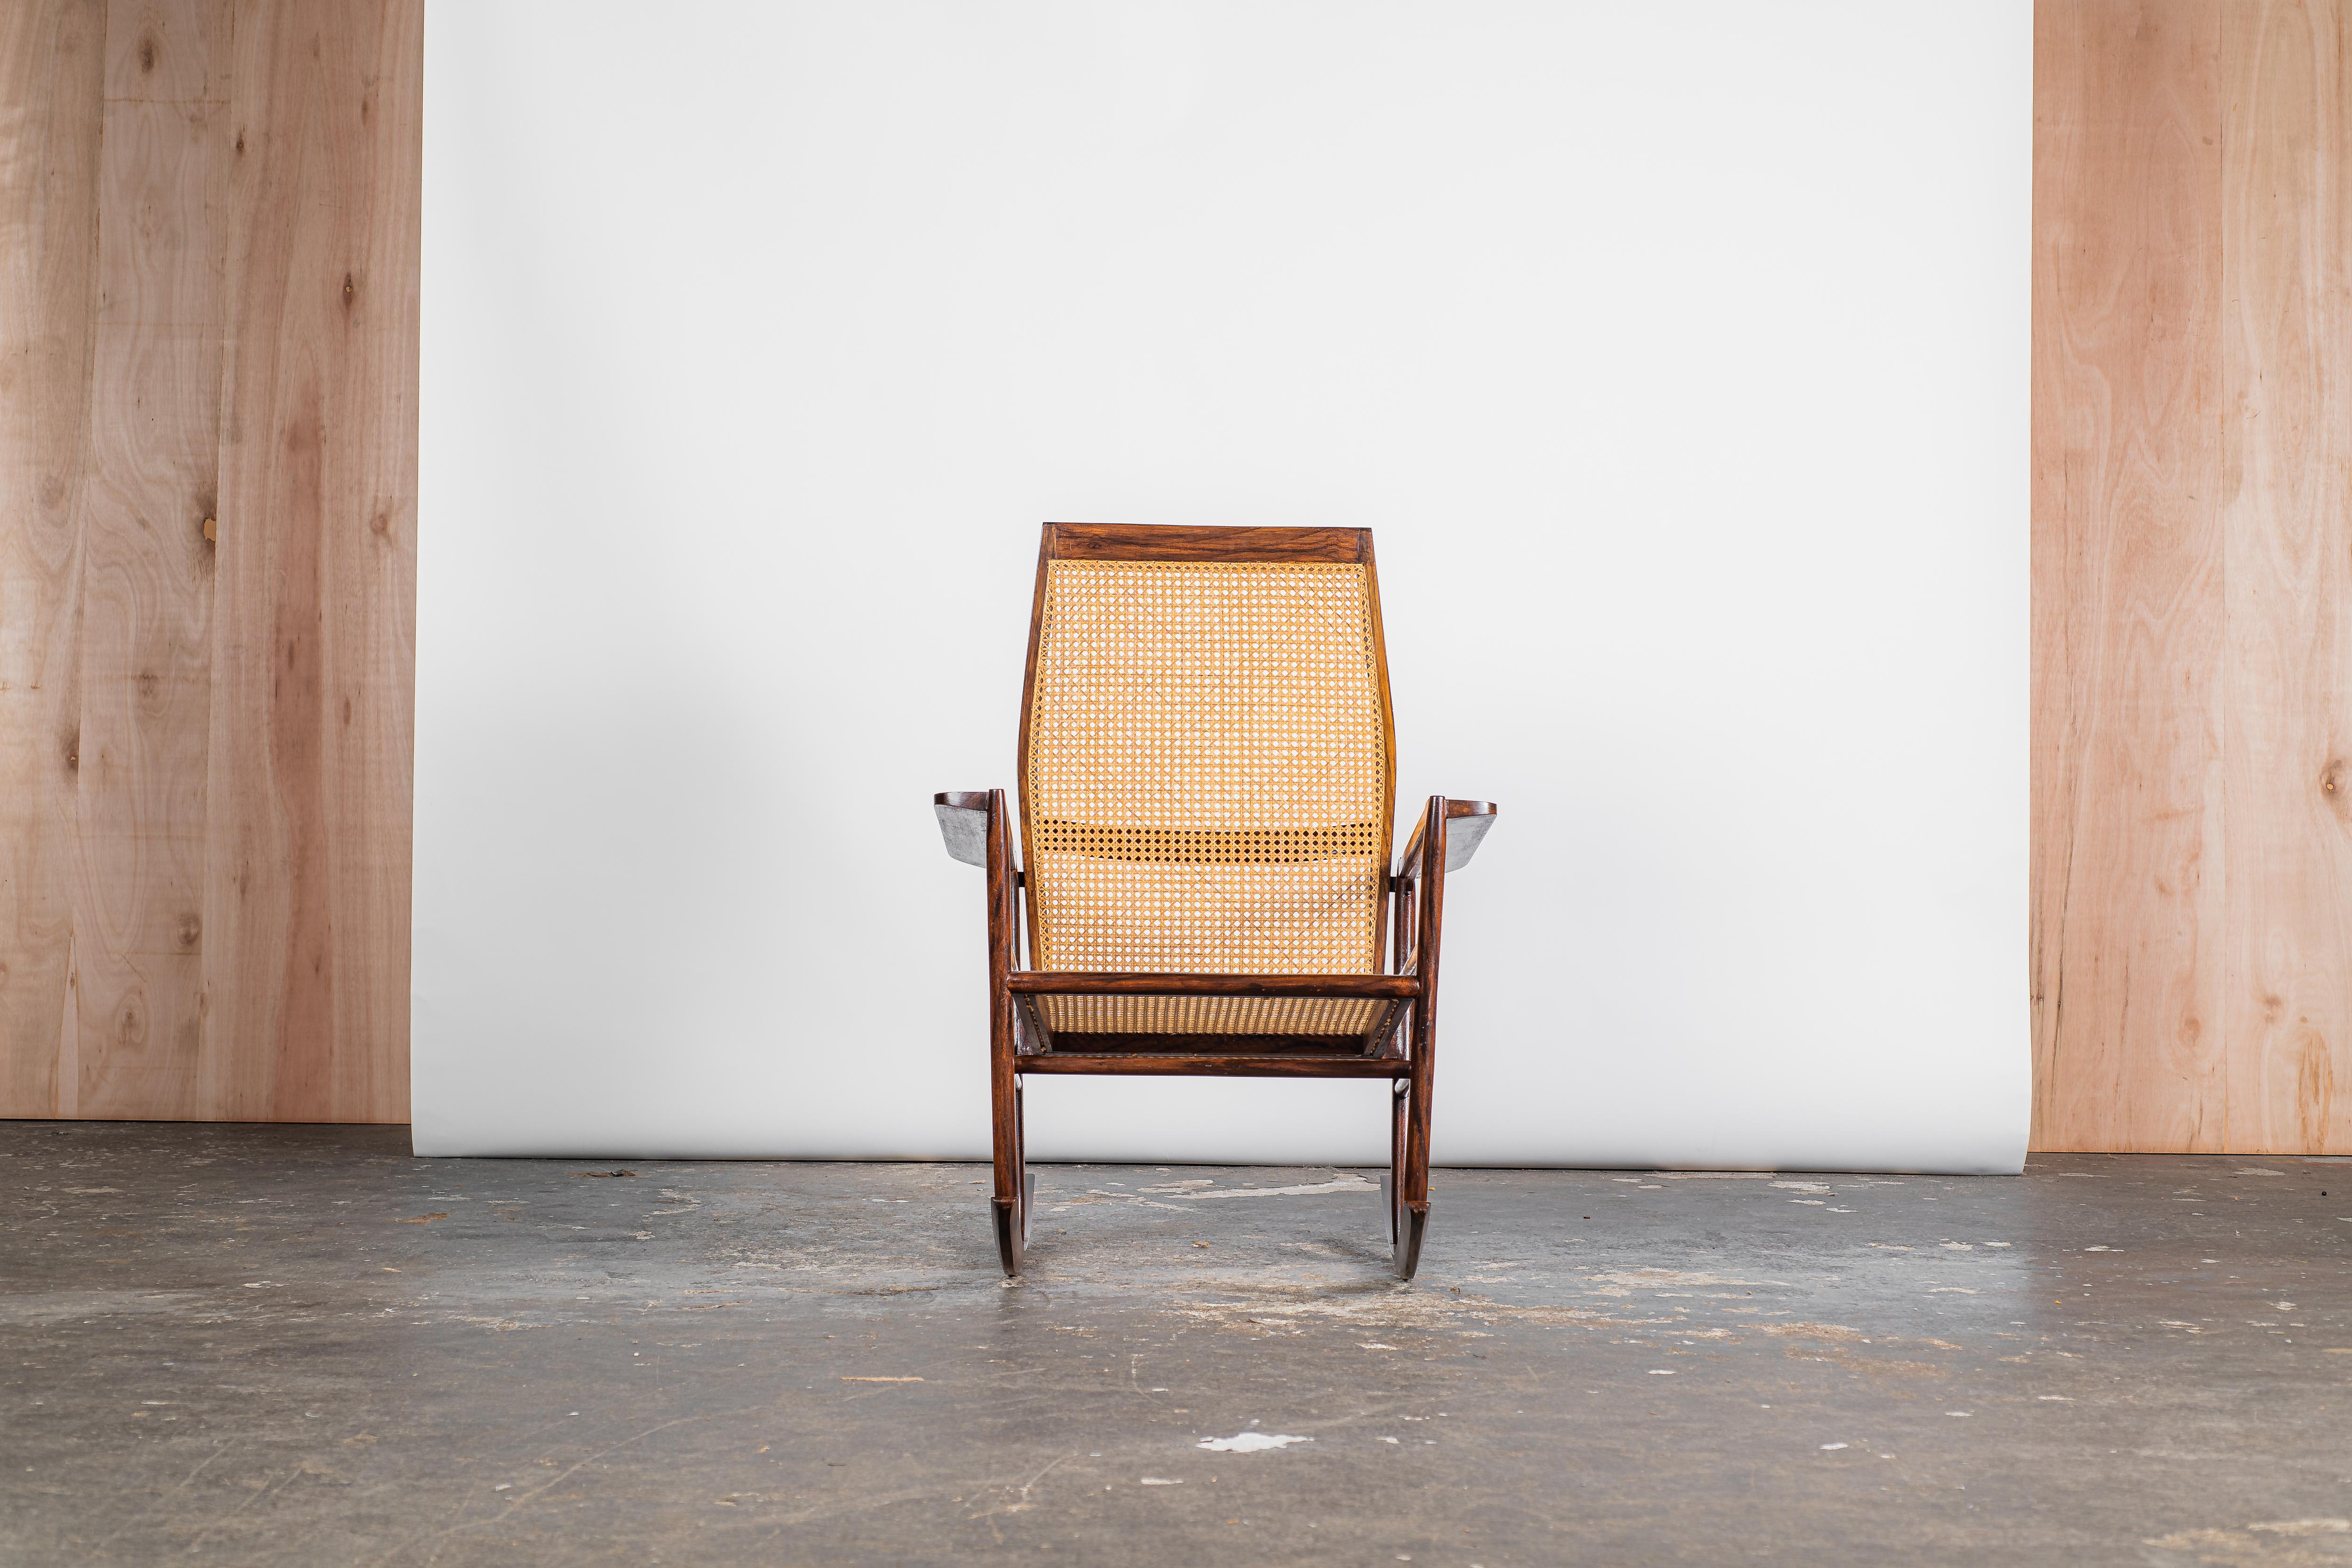 Emanating from the creative genius of Joaquim Tenreiro, this circa 1947 rocking chair embodies an exquisite testament to mid-20th-century design. Comprising a hardwood framework elegantly juxtaposed with a cane seat and backrest, it stands as a